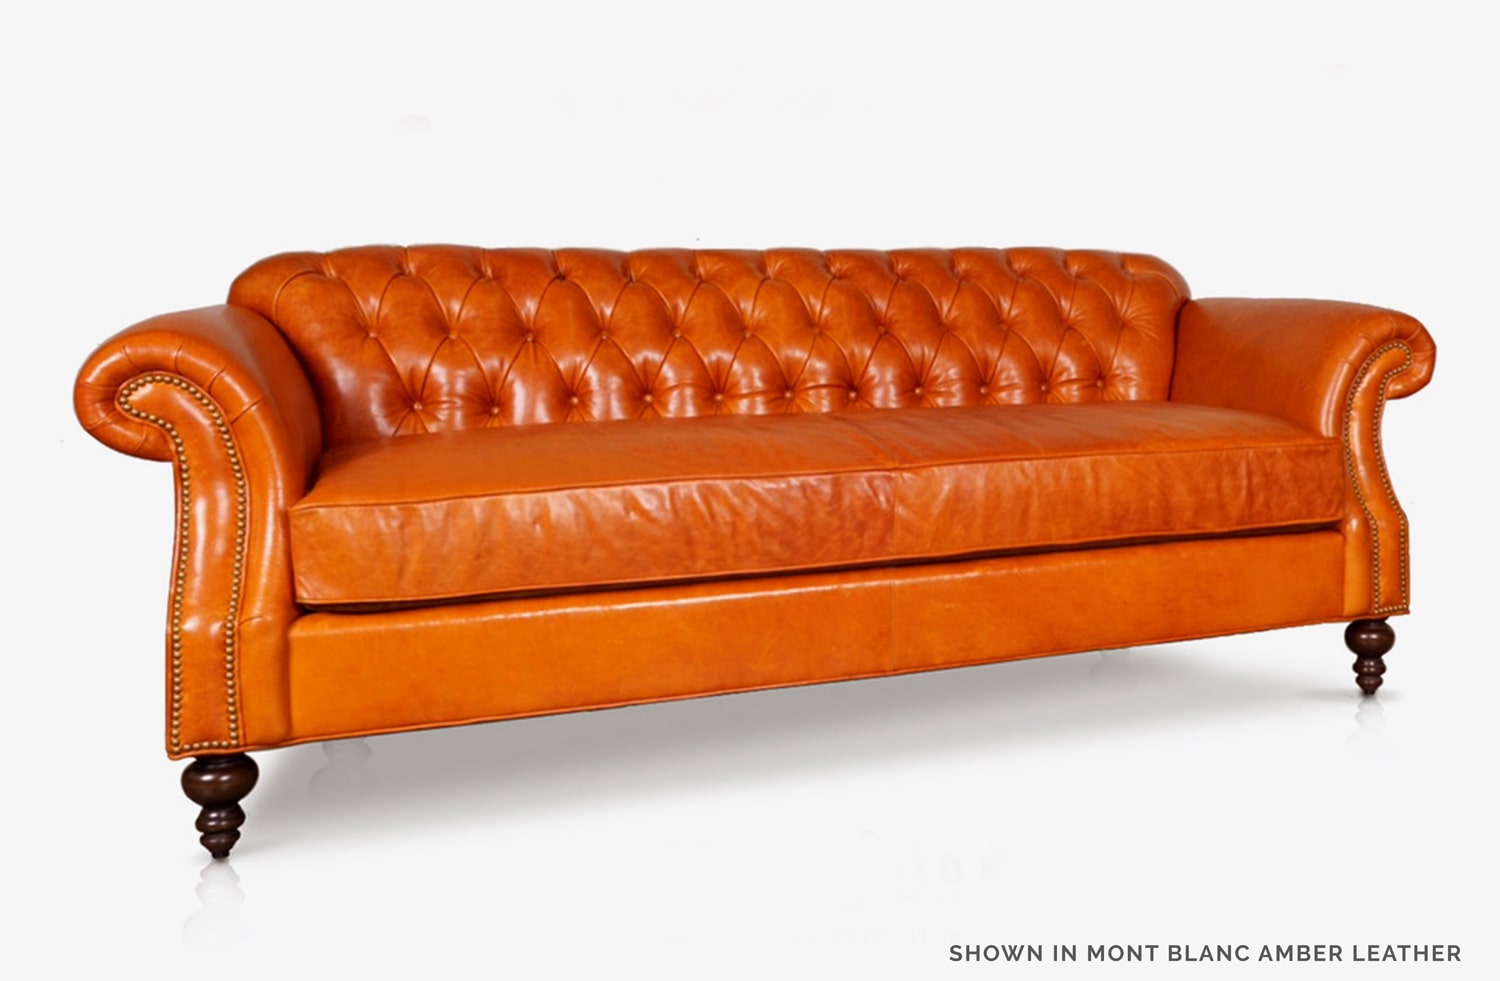 Whitman Mont Blanc Amber Leather Chesterfield Sofa